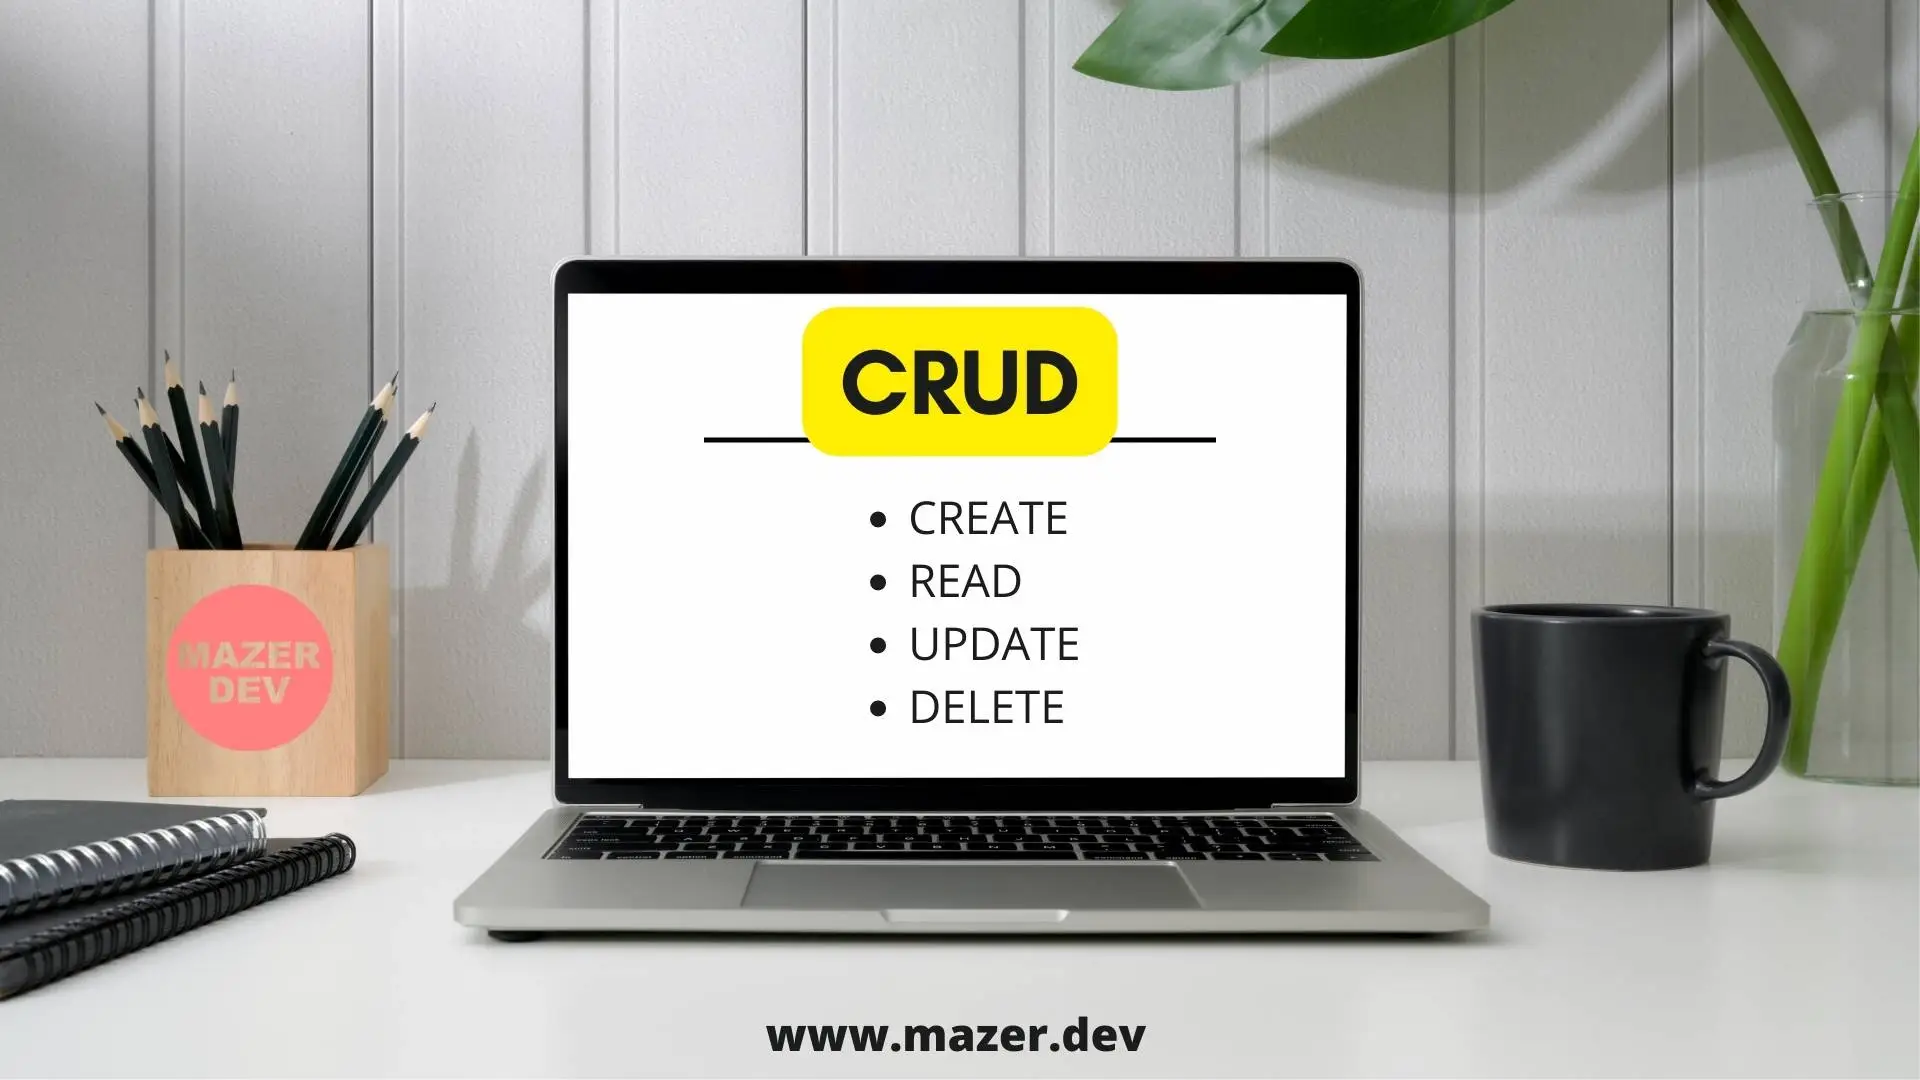 How To CRUD (Create, Read, Update, Delete) With Laravel